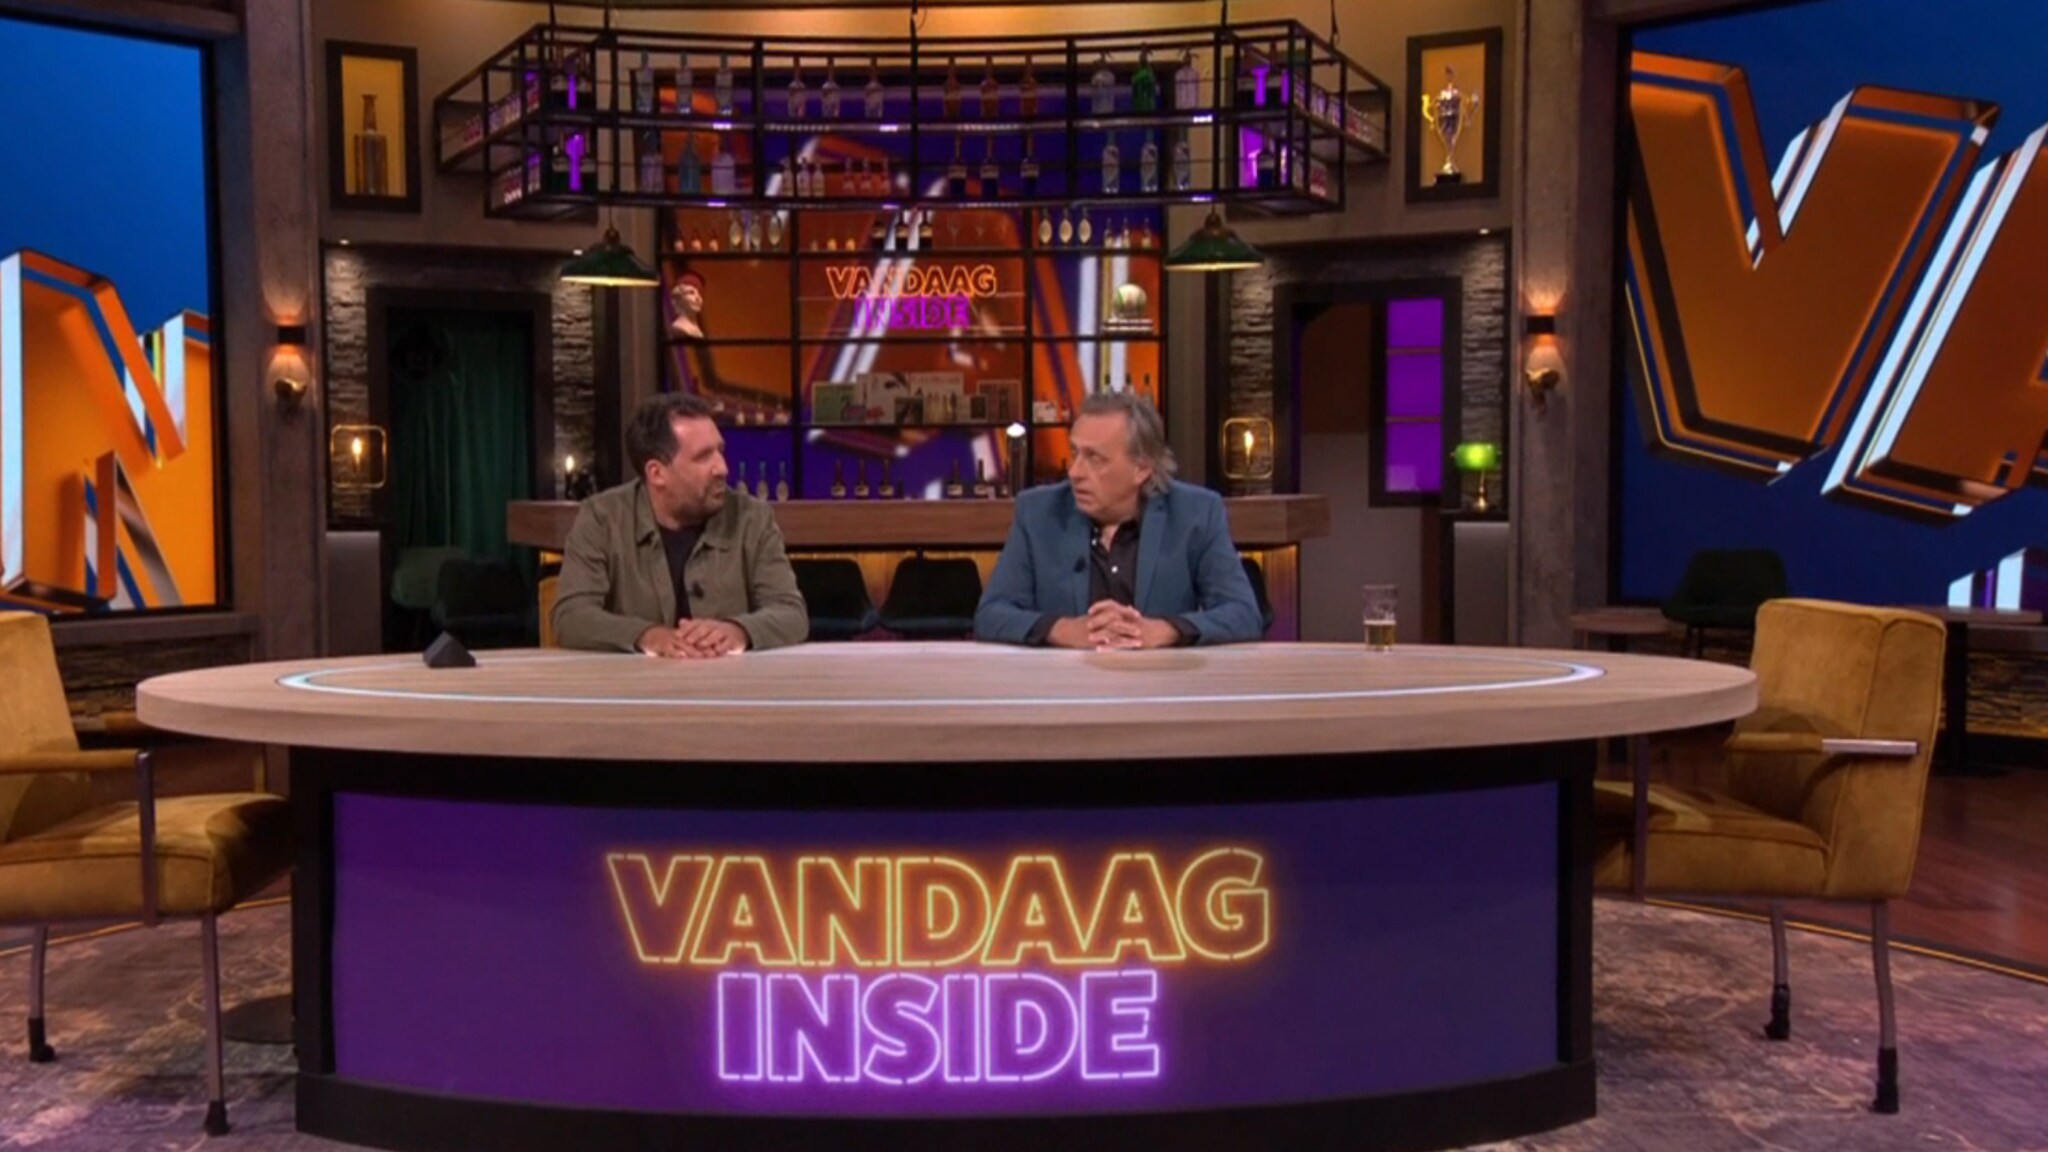 Marcel & Gijs start a new talk show in the Today Inside studio: "It still smells like Wilfred in here"